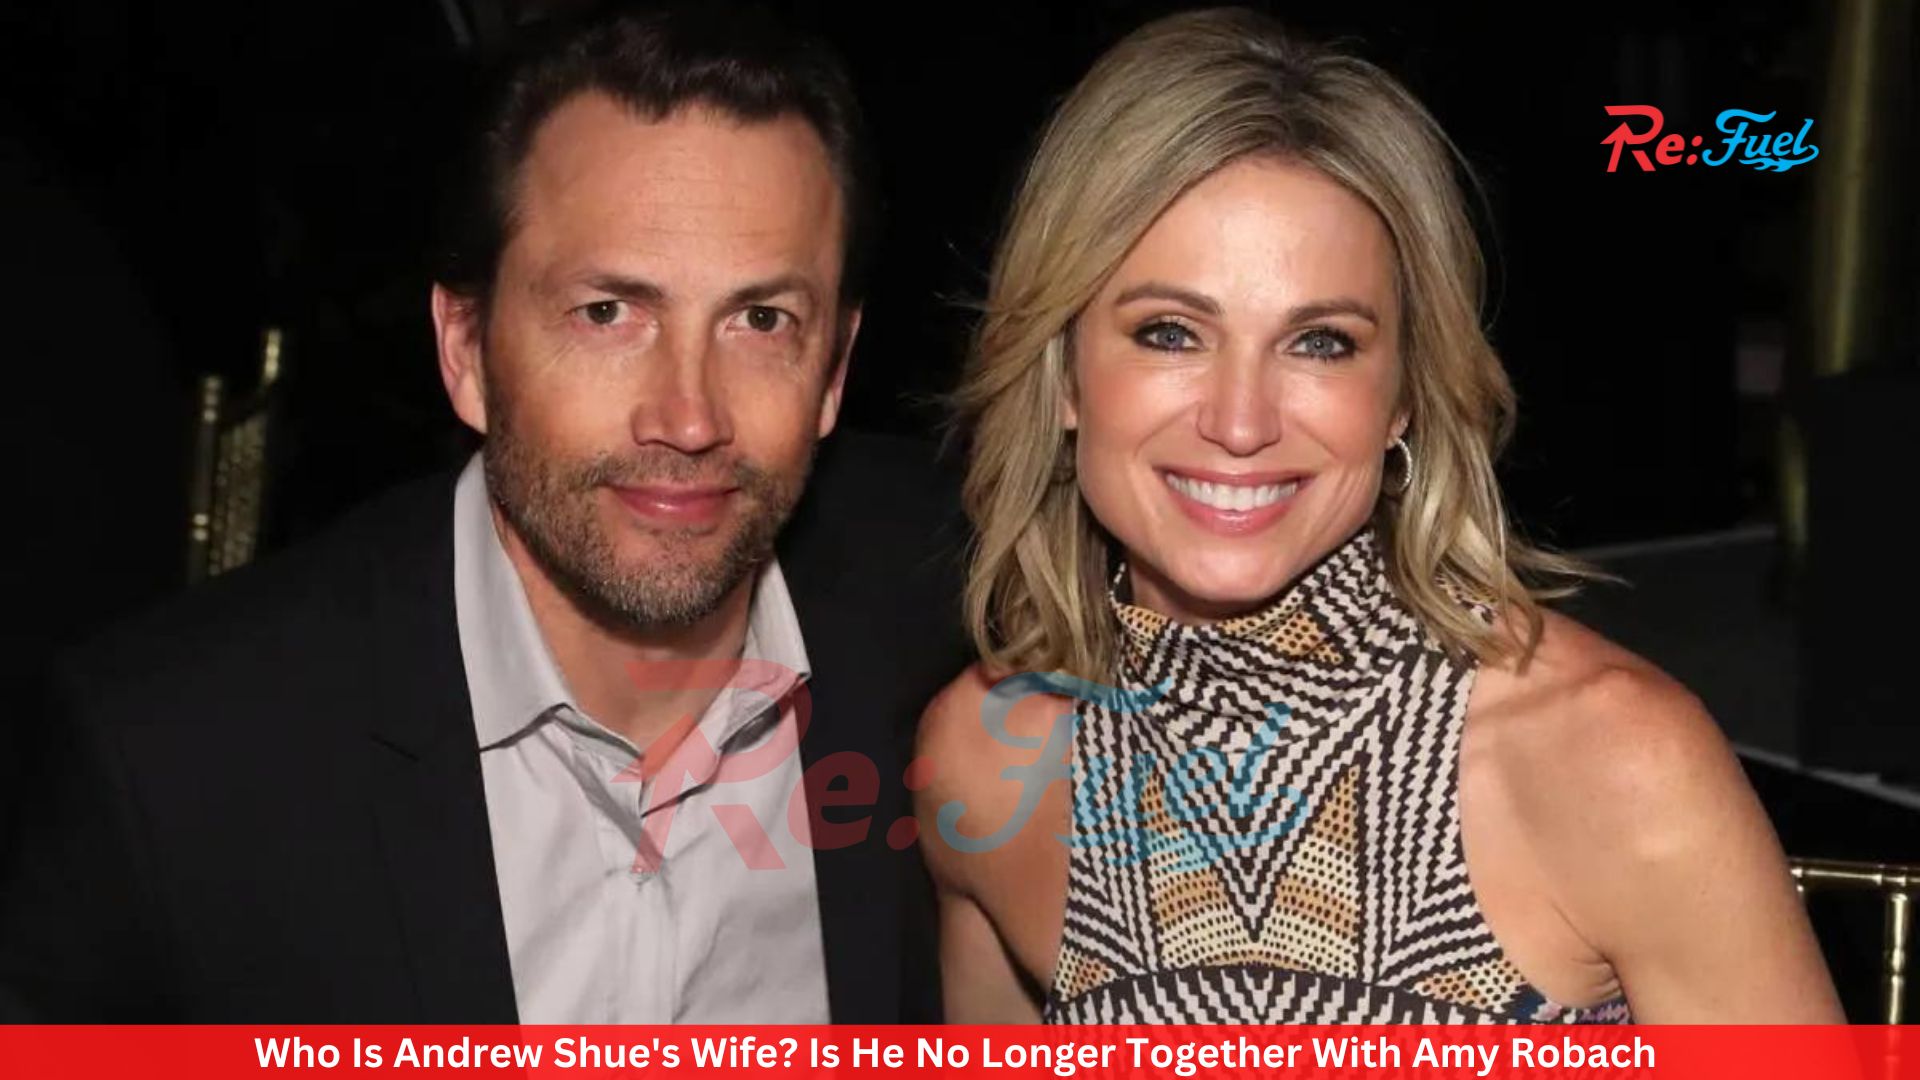 Who Is Andrew Shue's Wife? Is He No Longer Together With Amy Robach